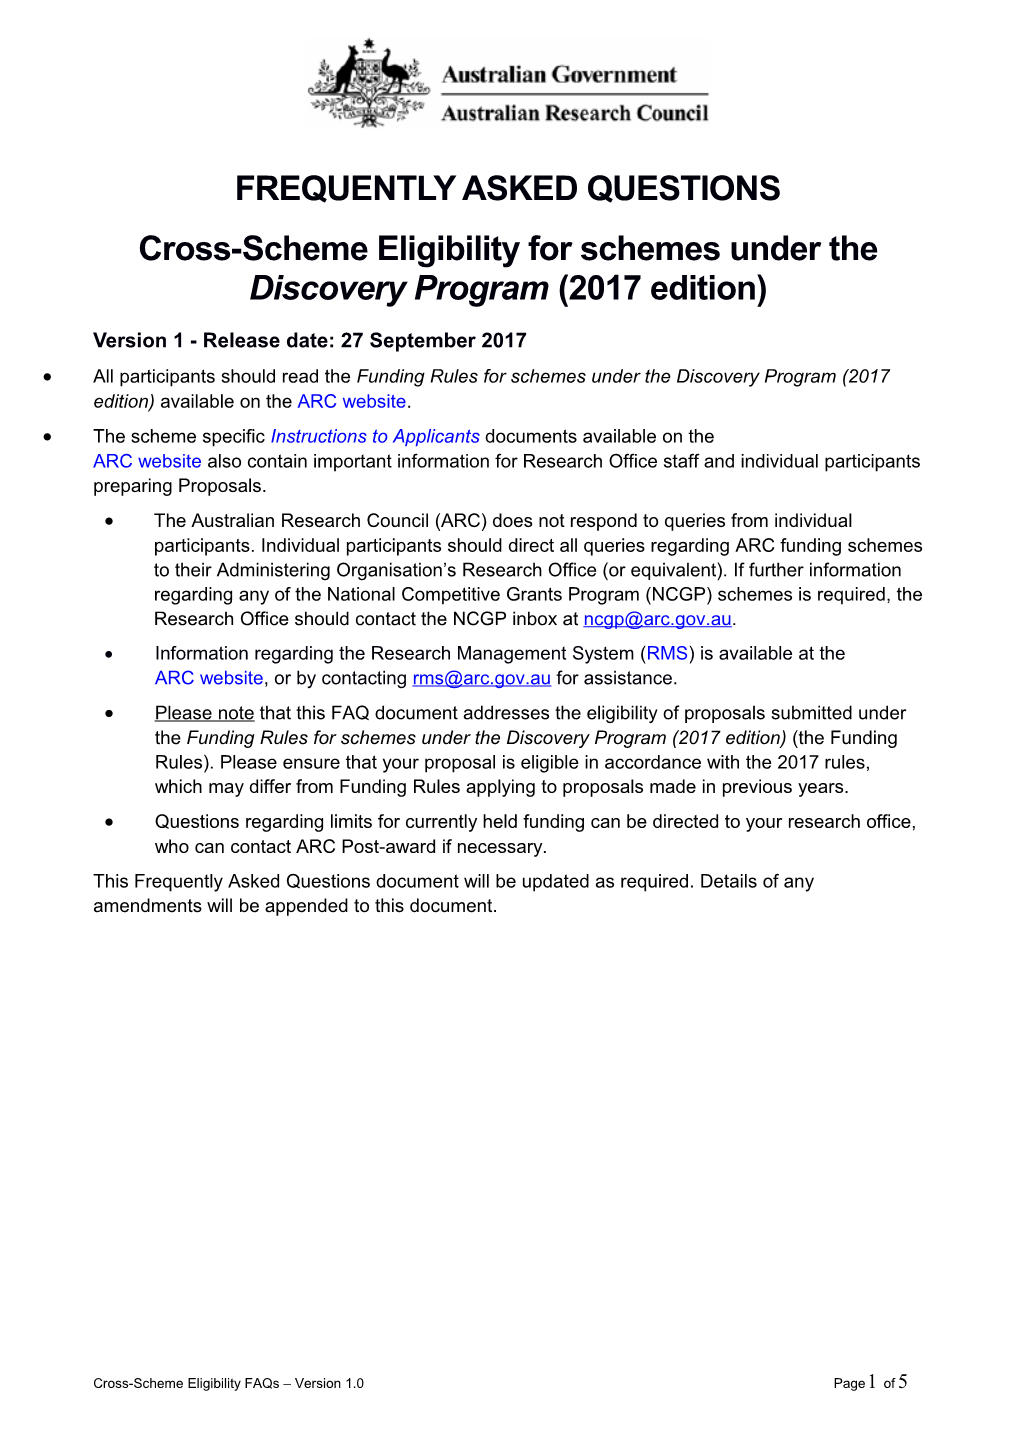 Cross-Scheme Eligibility for Schemes Under the Discovery Program (2017 Edition)